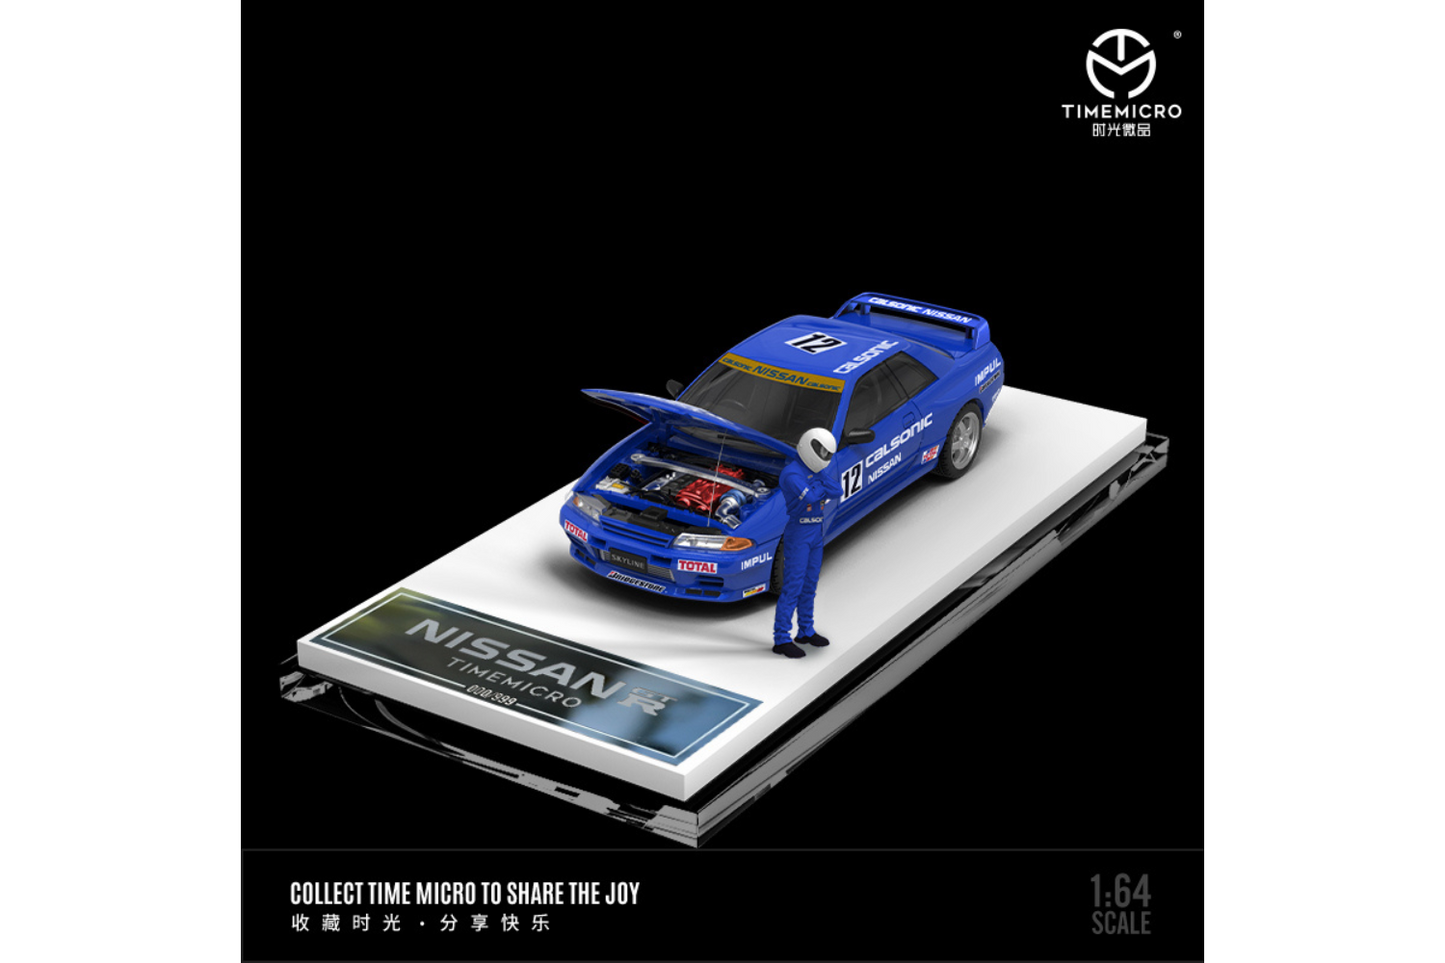 Time Micro 1/64 Nissan Skyline GT-R (R32) In #12 Calsonic Livery